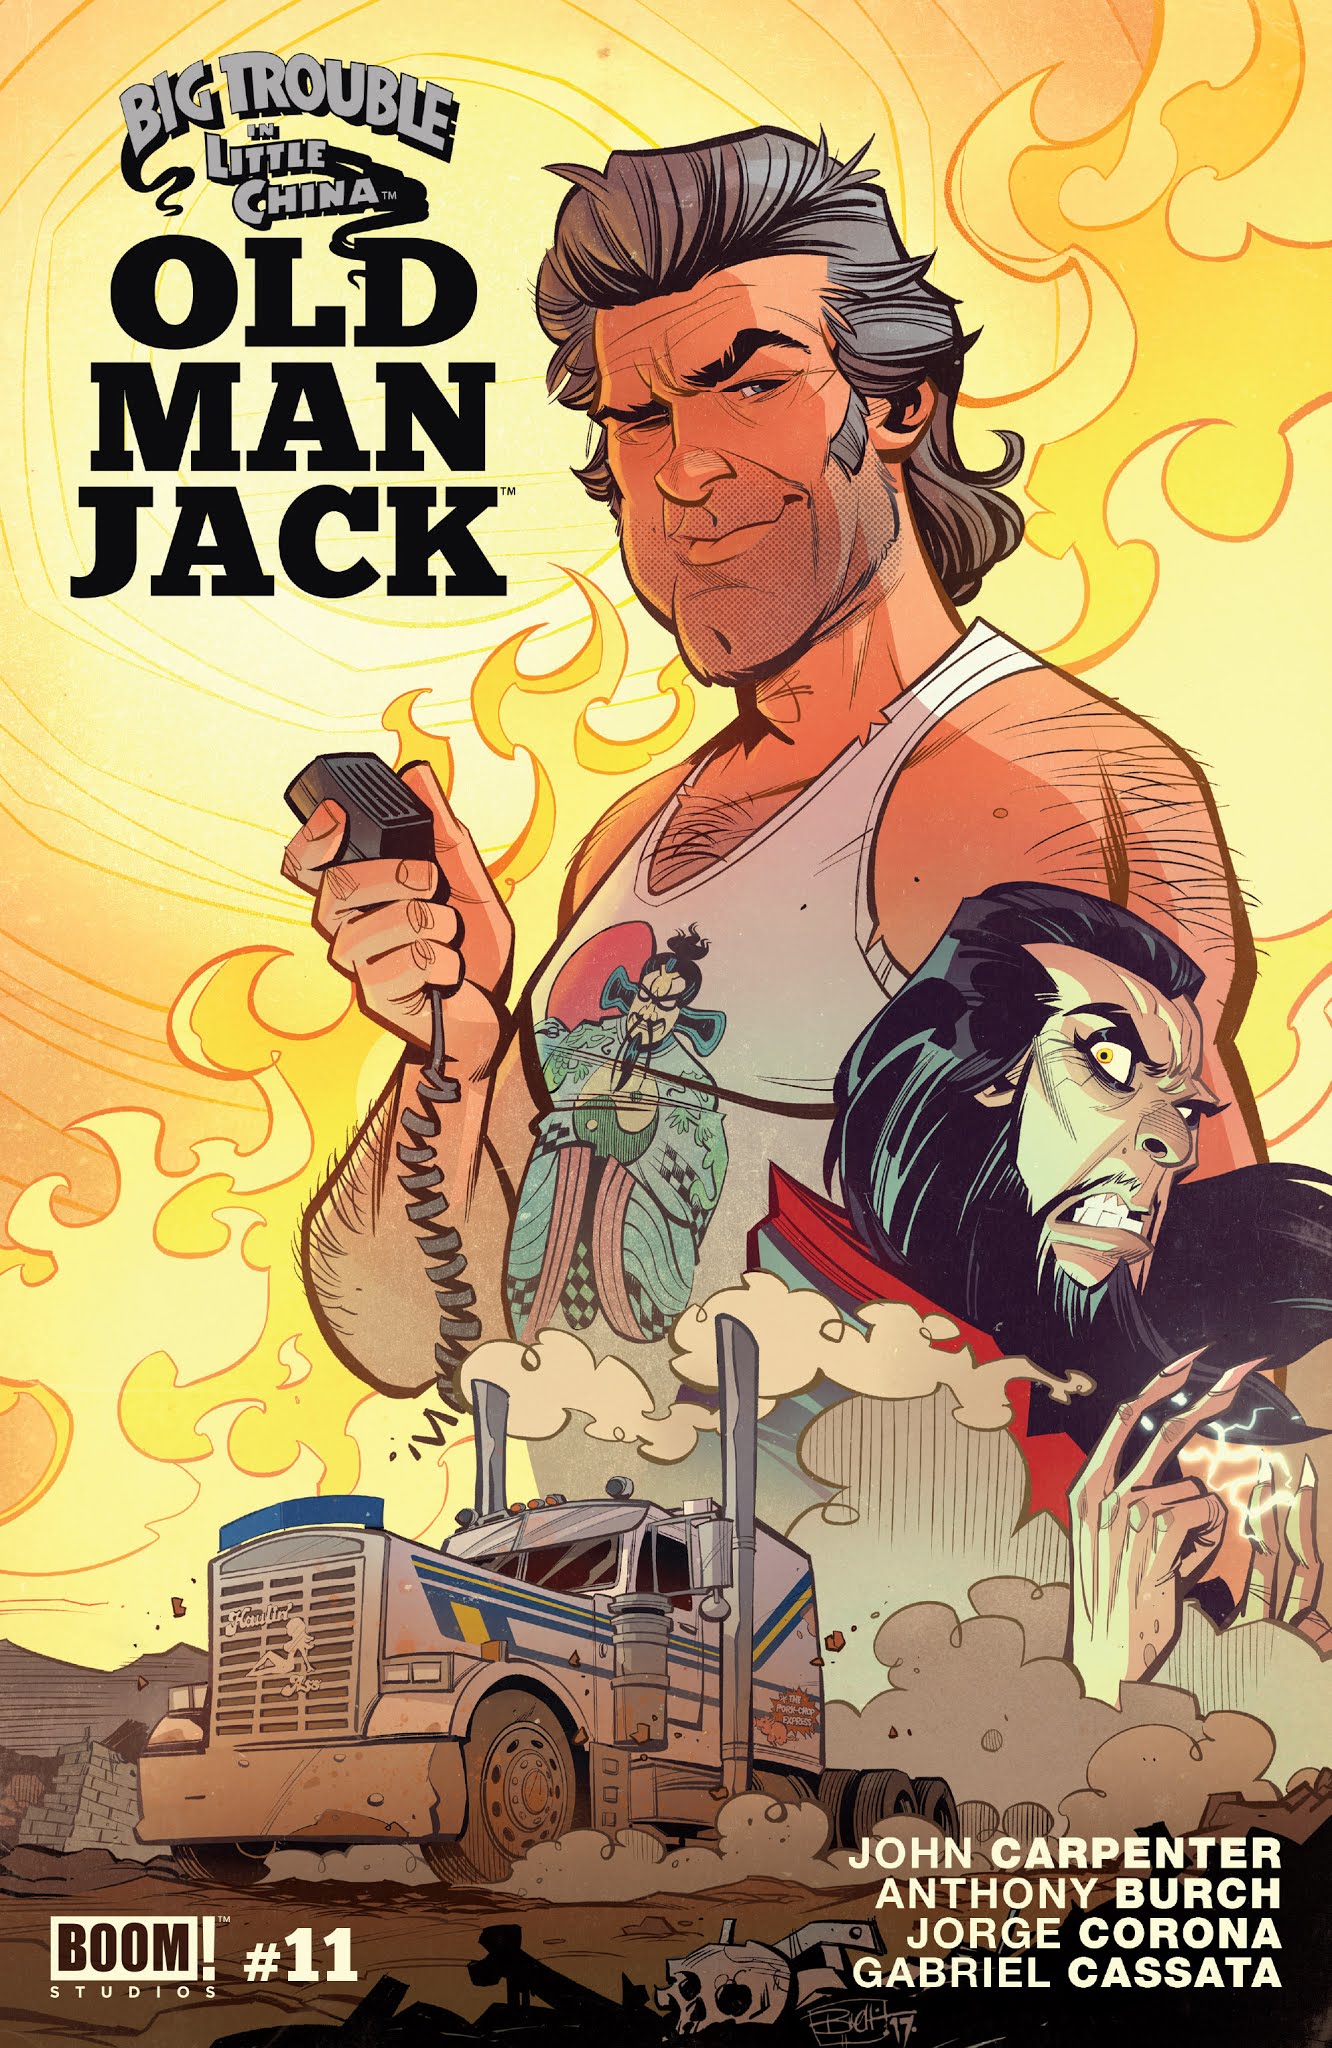 Read online Big Trouble in Little China: Old Man Jack comic -  Issue #11 - 1